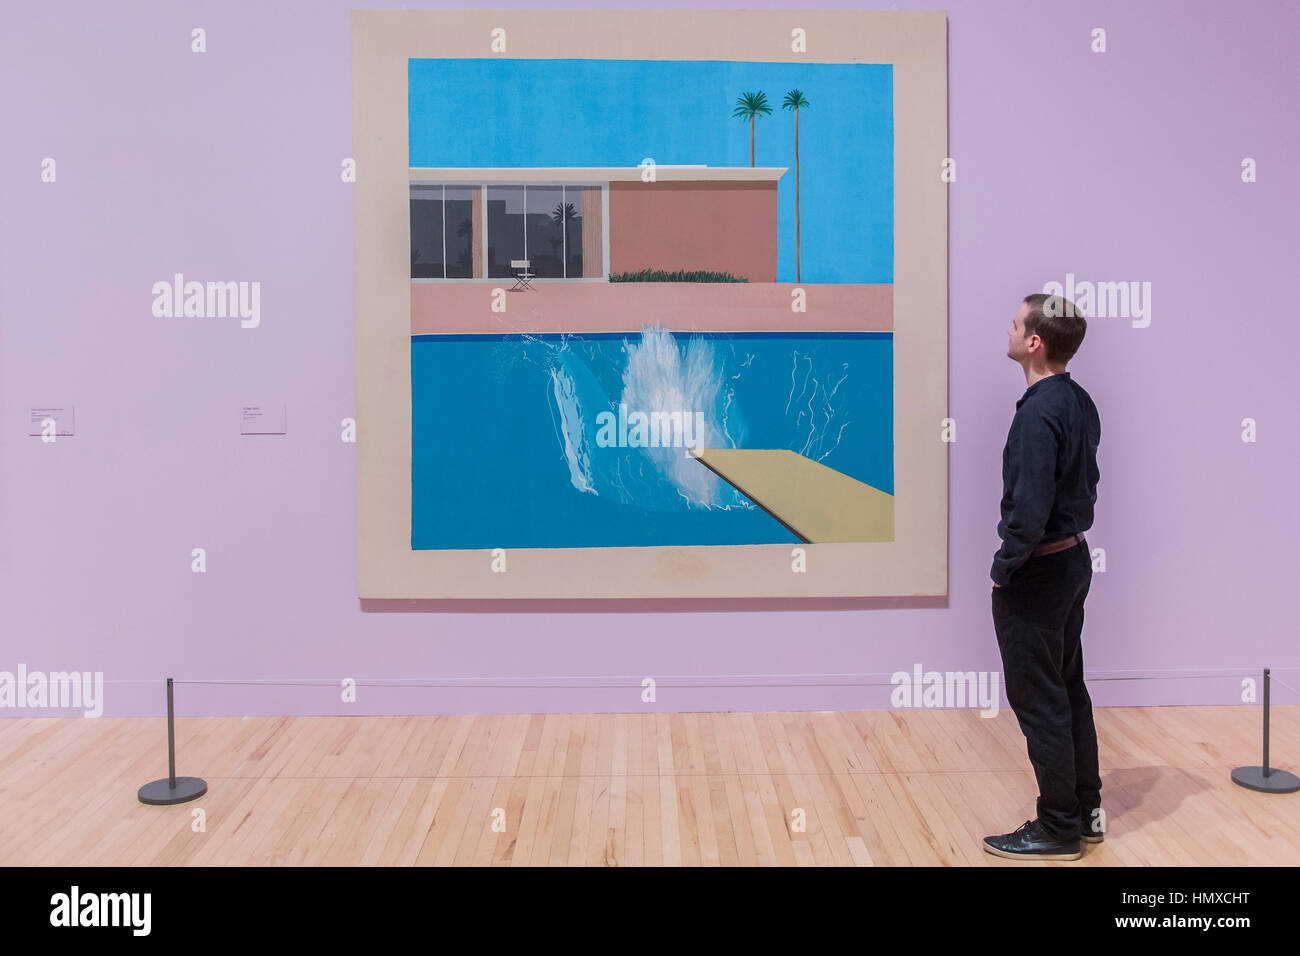 Tate Britain, London, UK. 6th Feb, 2017. A Bigger Splash, 1967 - David Hockney, a major new retrospective, at Tate Britain's. It includes more than 200 works and celebrates Hockney's achievement in painting, drawing, print, photography and video. As he approaches his 80th birthday, this exhibition offers an unprecedented overview of the artist's 60-year career. It runs from 9 Feb to 29 May 2017. London 06 Feb 2017. Credit: Guy Bell/Alamy Live News Stock Photo